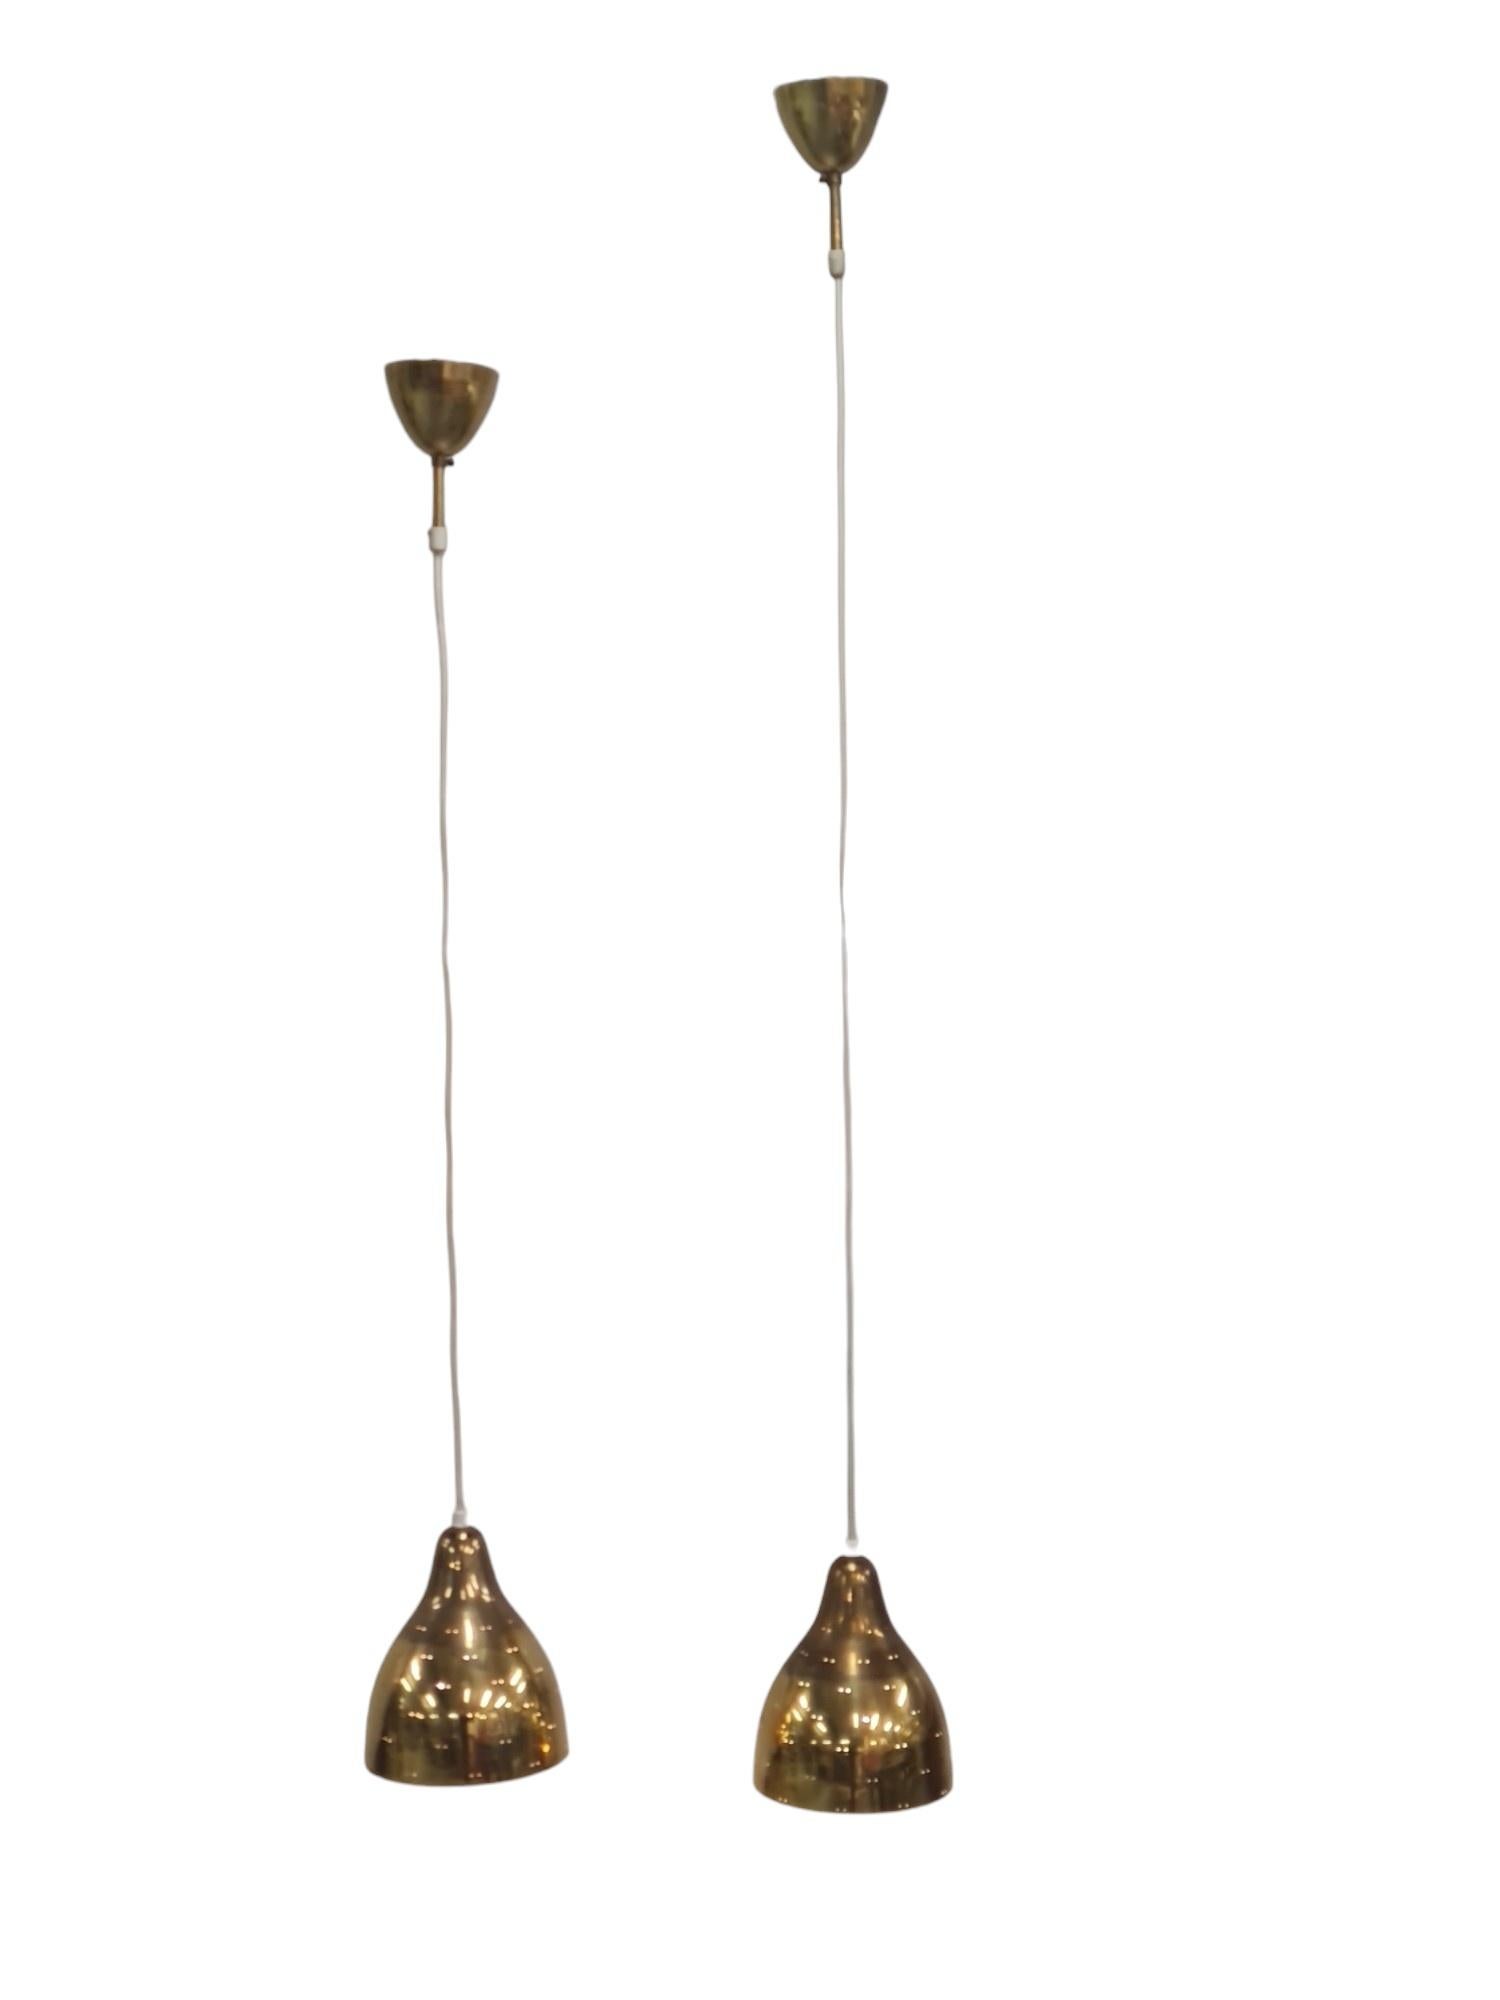 Pair Of Brass Itsu Ceiling Pendants Model ER 84 In Good Condition For Sale In Helsinki, FI